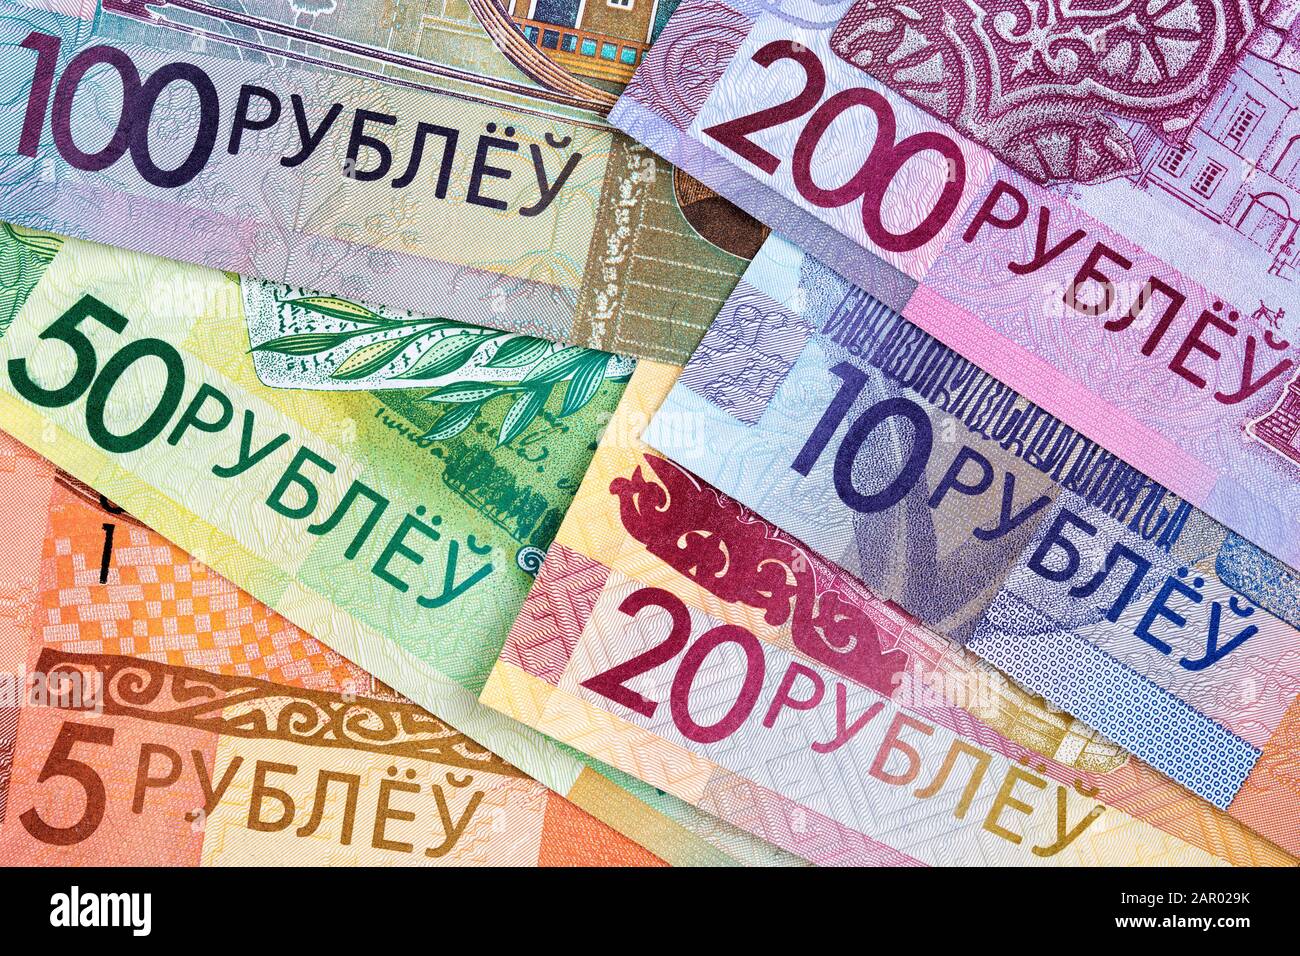 Belarusian money - rouble a business background Stock Photo